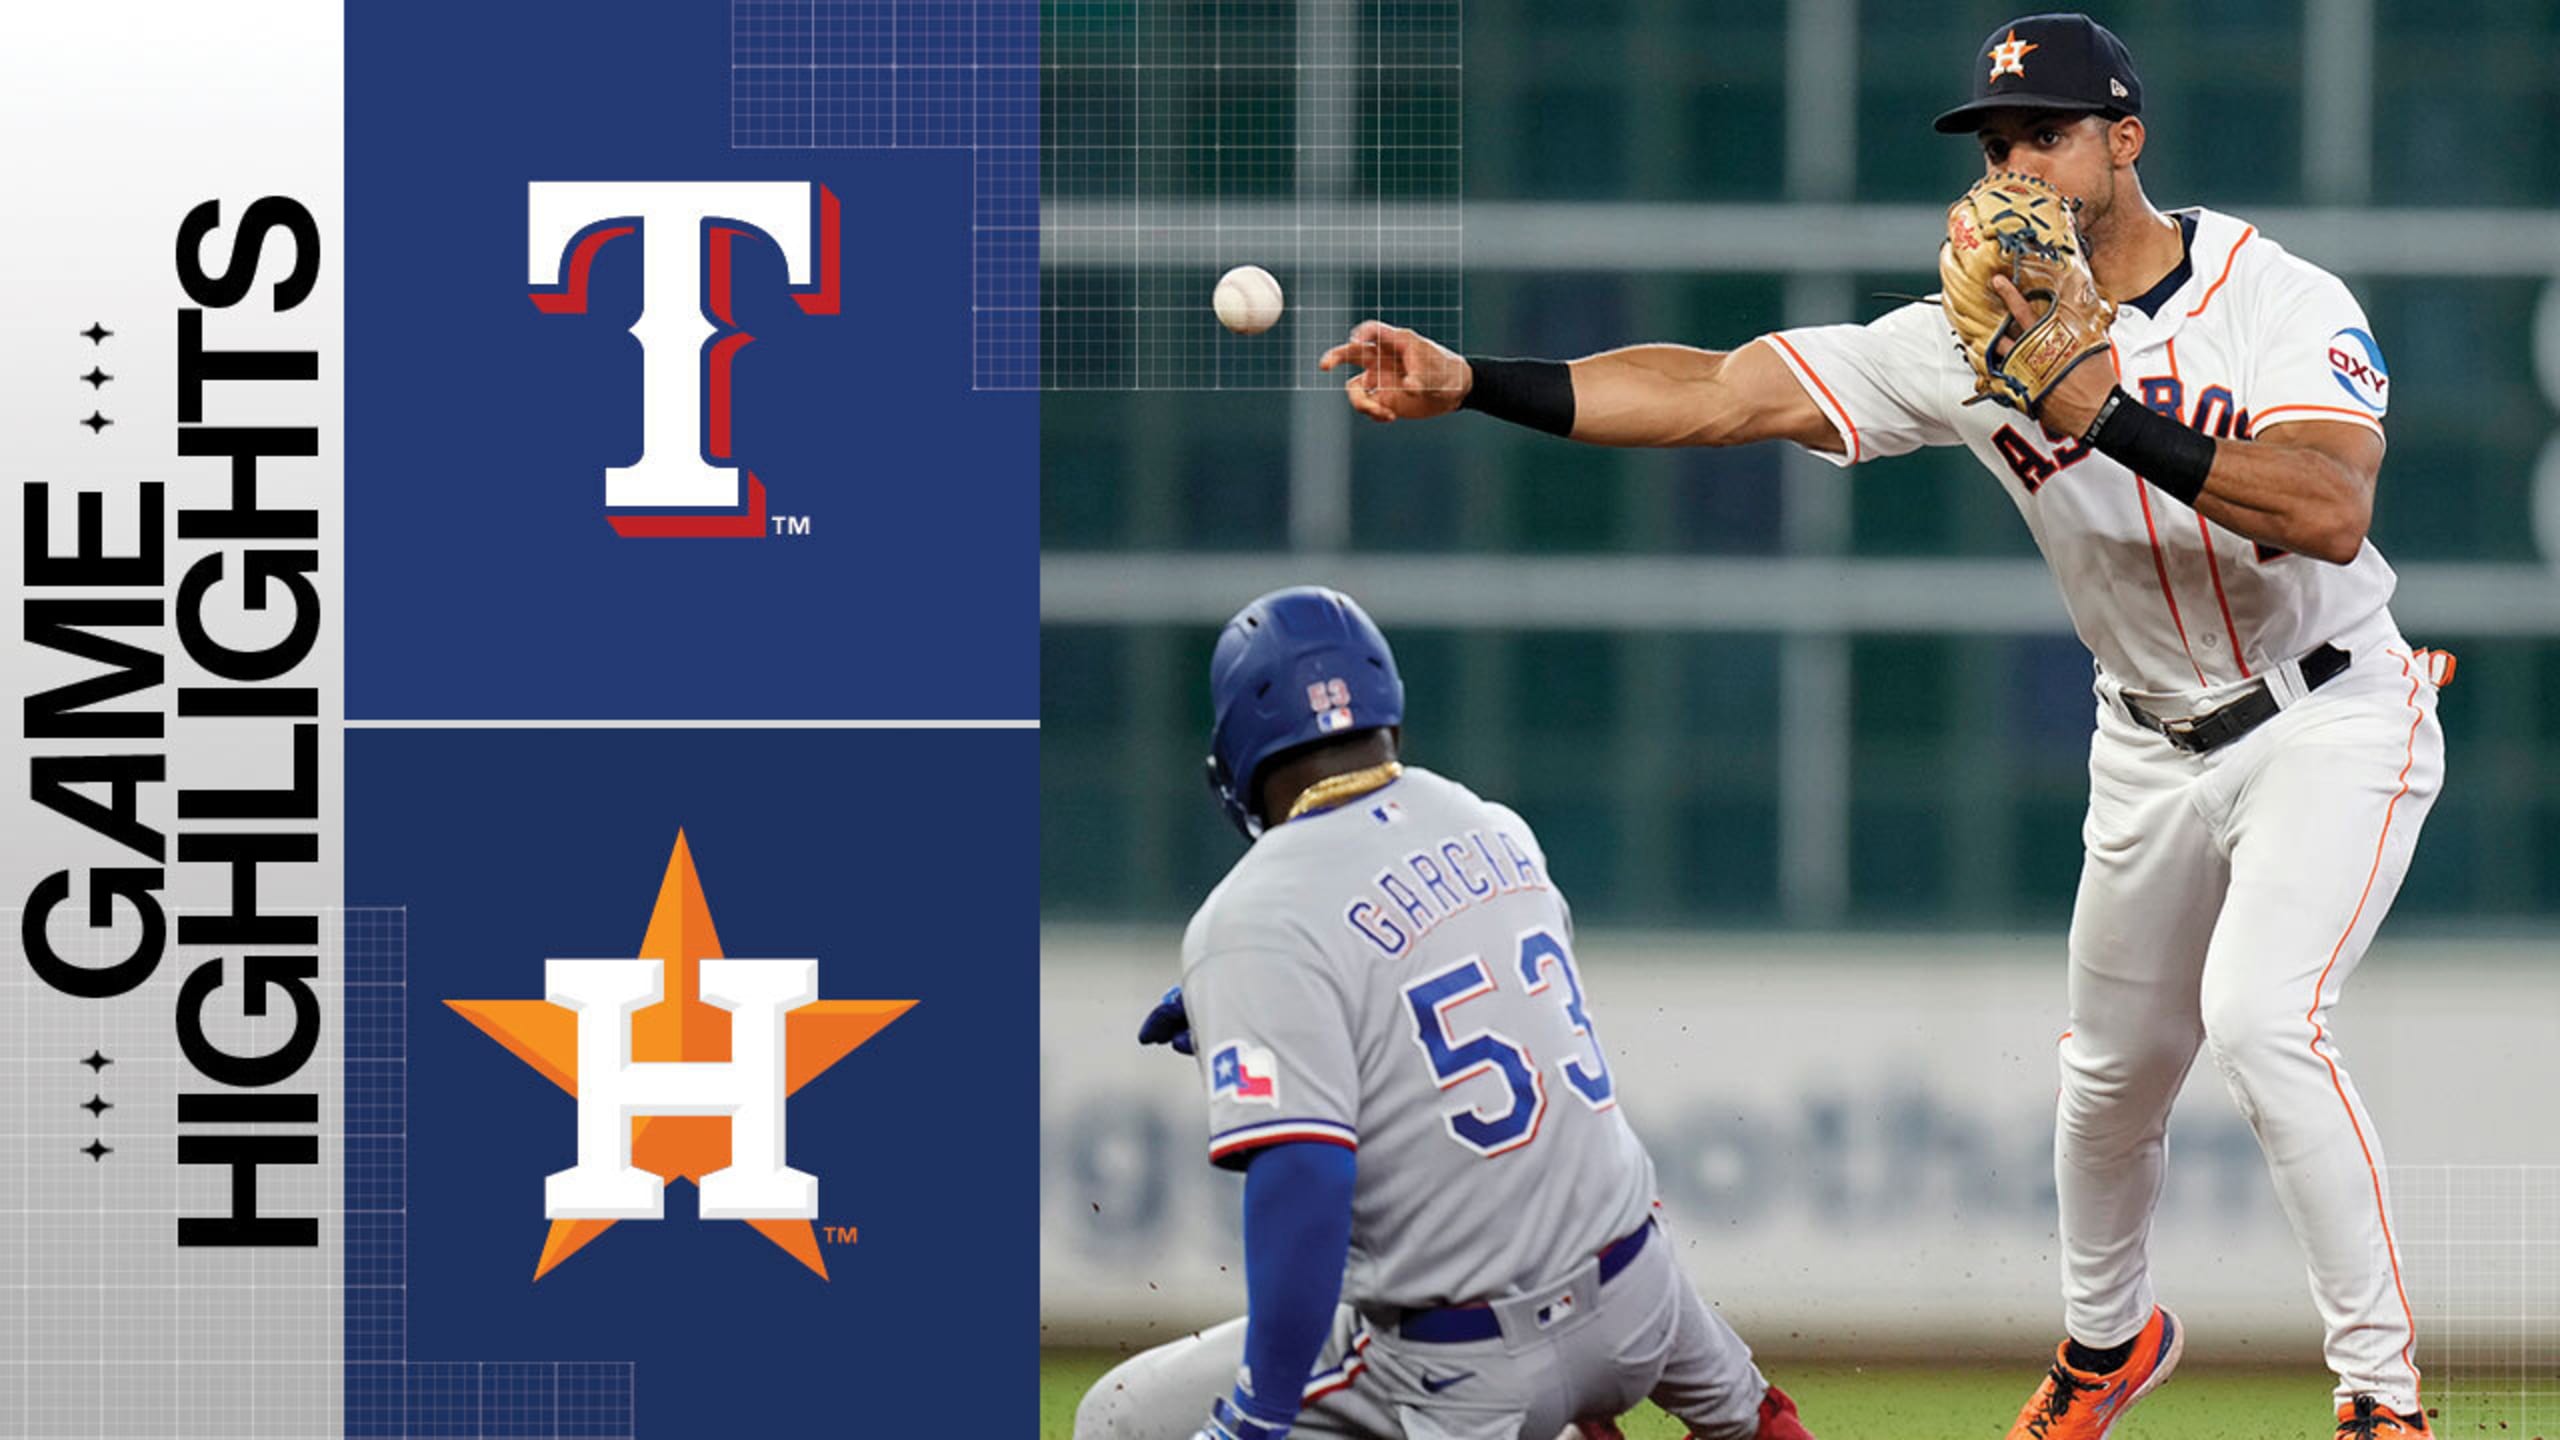 Rangers suddenly control tight AL West after finishing crucial